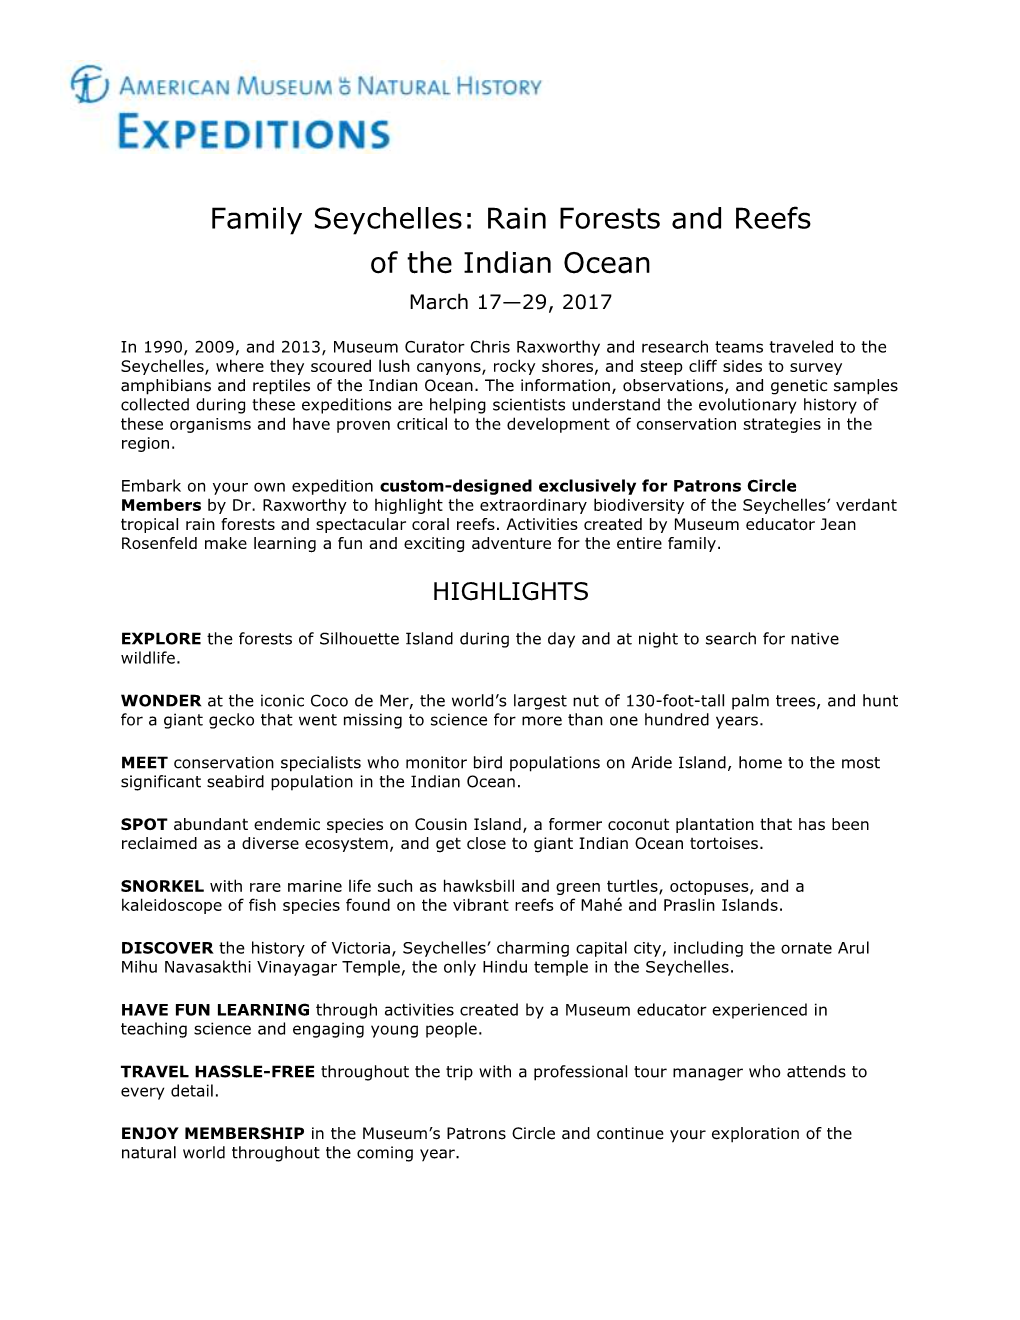 Family Seychelles: Rain Forests and Reefs of the Indian Ocean March 17—29, 2017